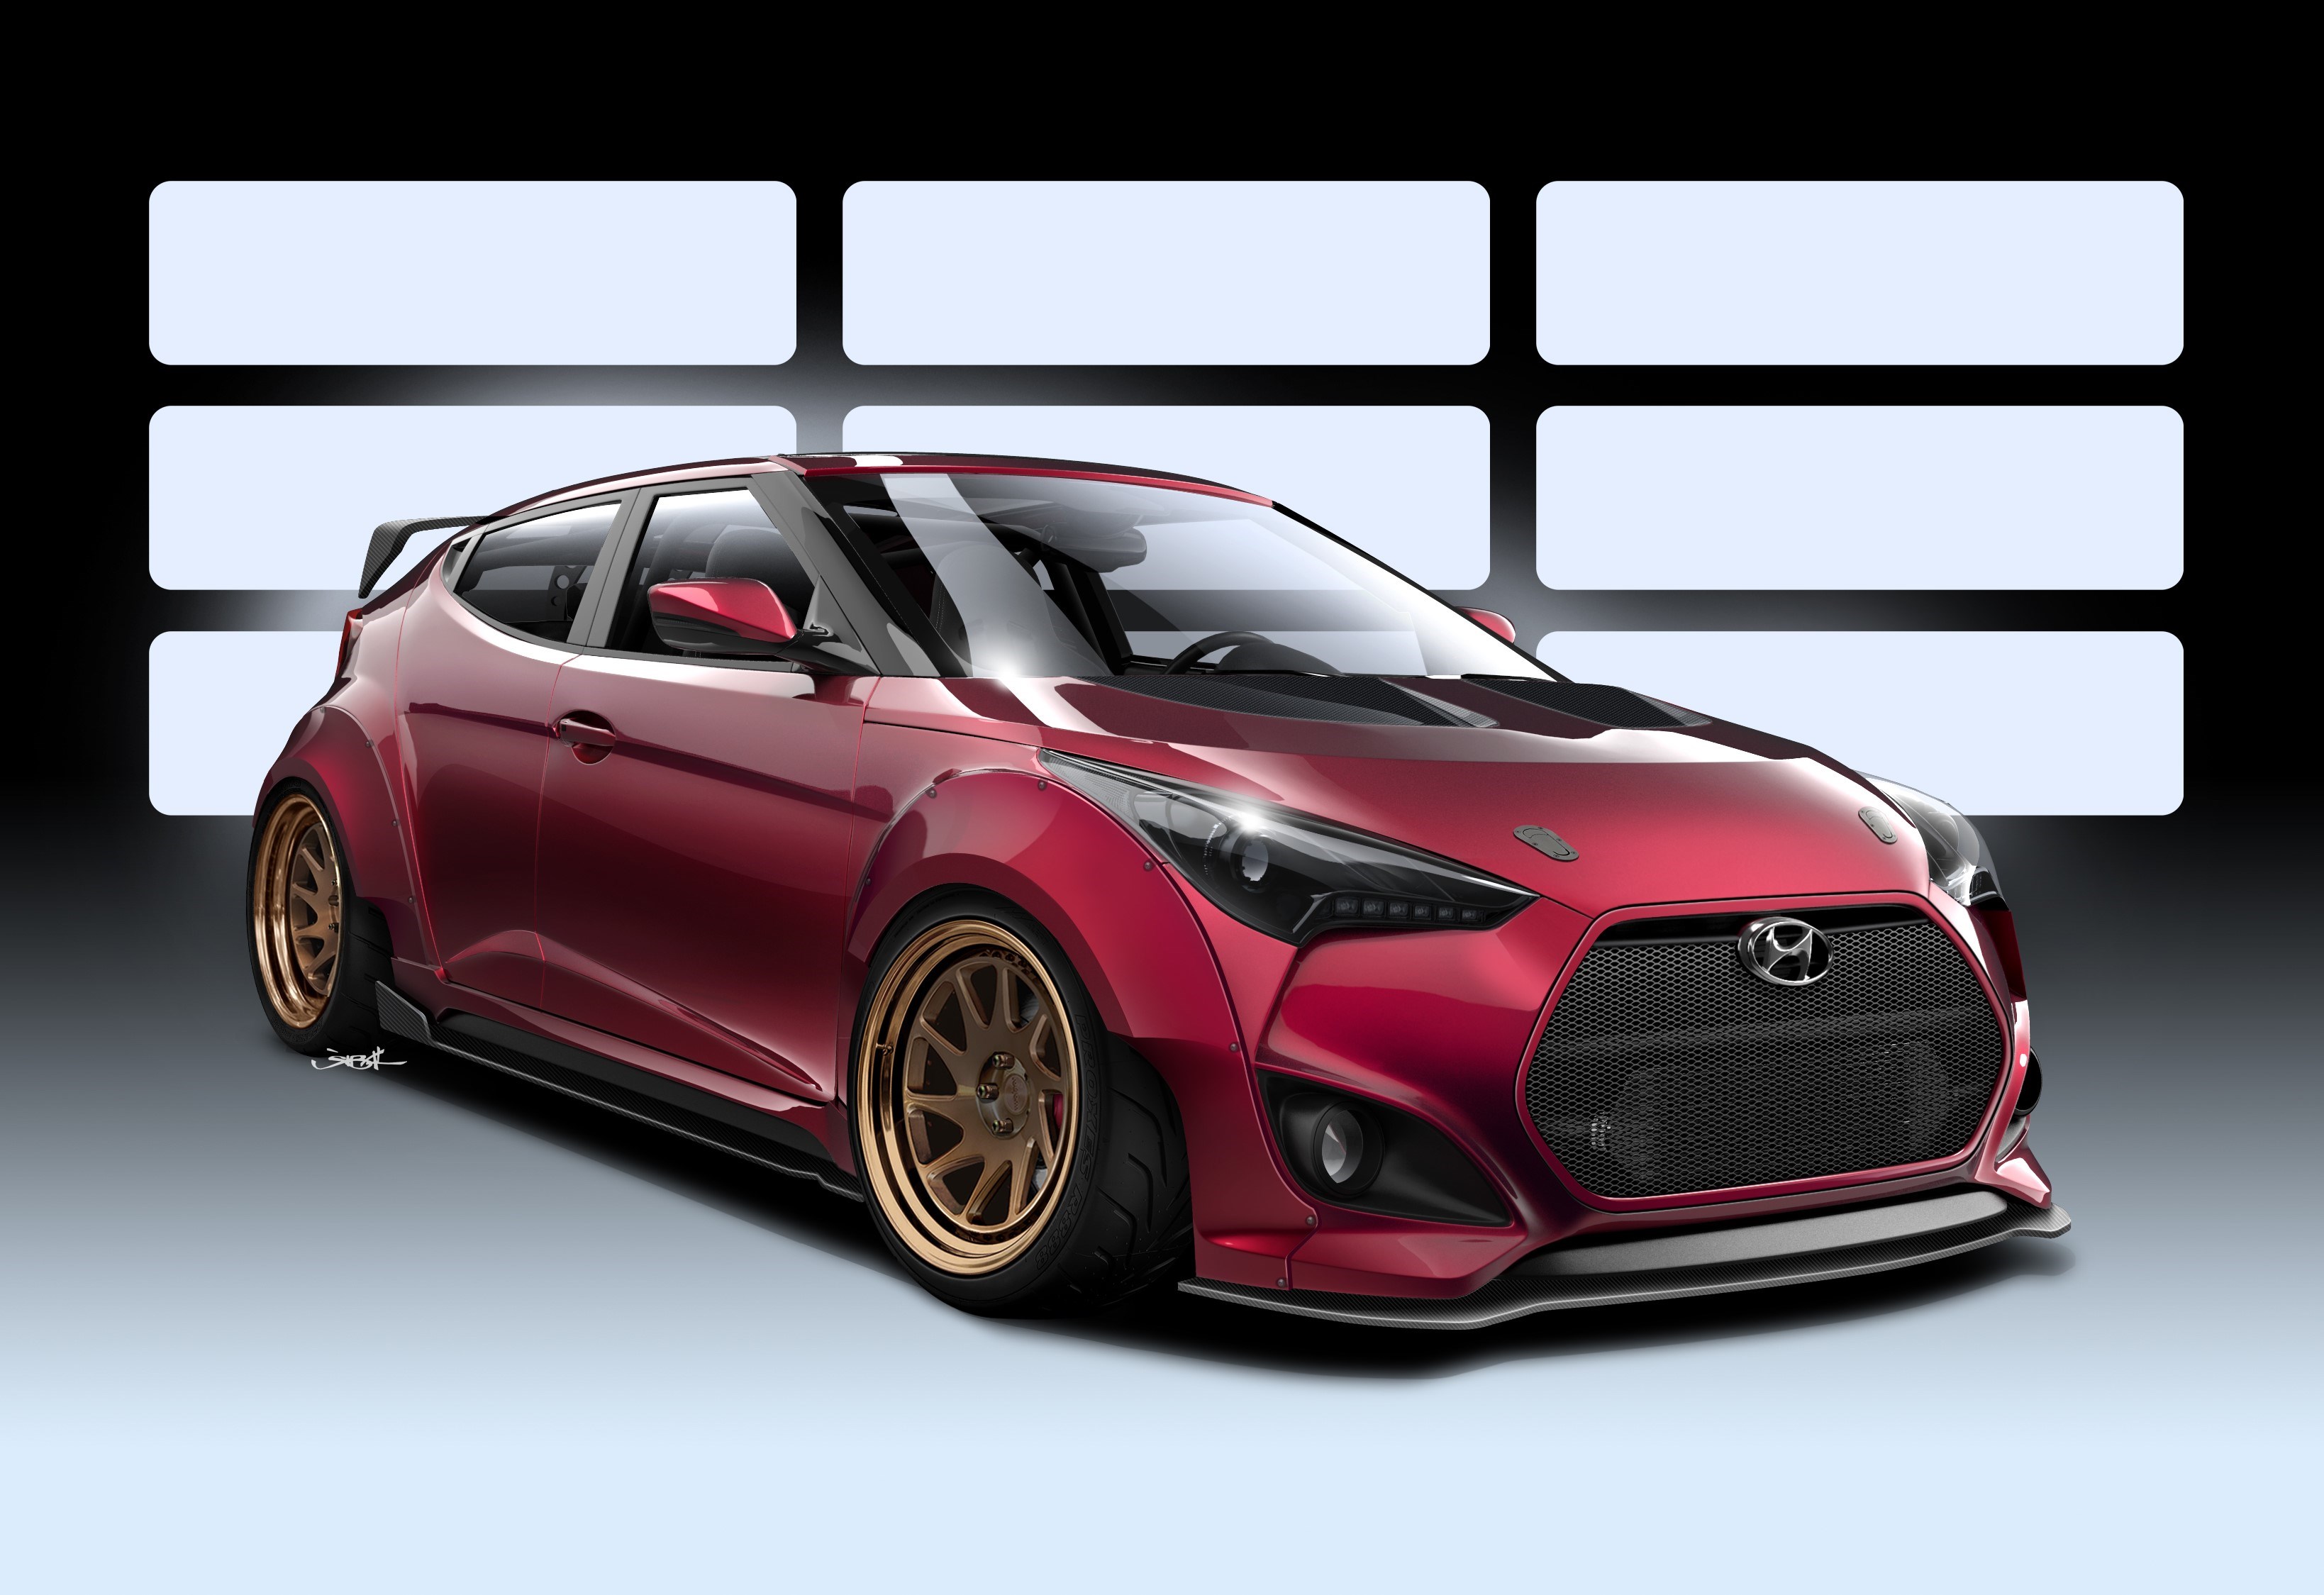 HYUNDAI AND GURNADE INC. LINK UP TO CREATE RACE-READY VELOSTER CONCEPT FOR 2016 SEMA SHOW